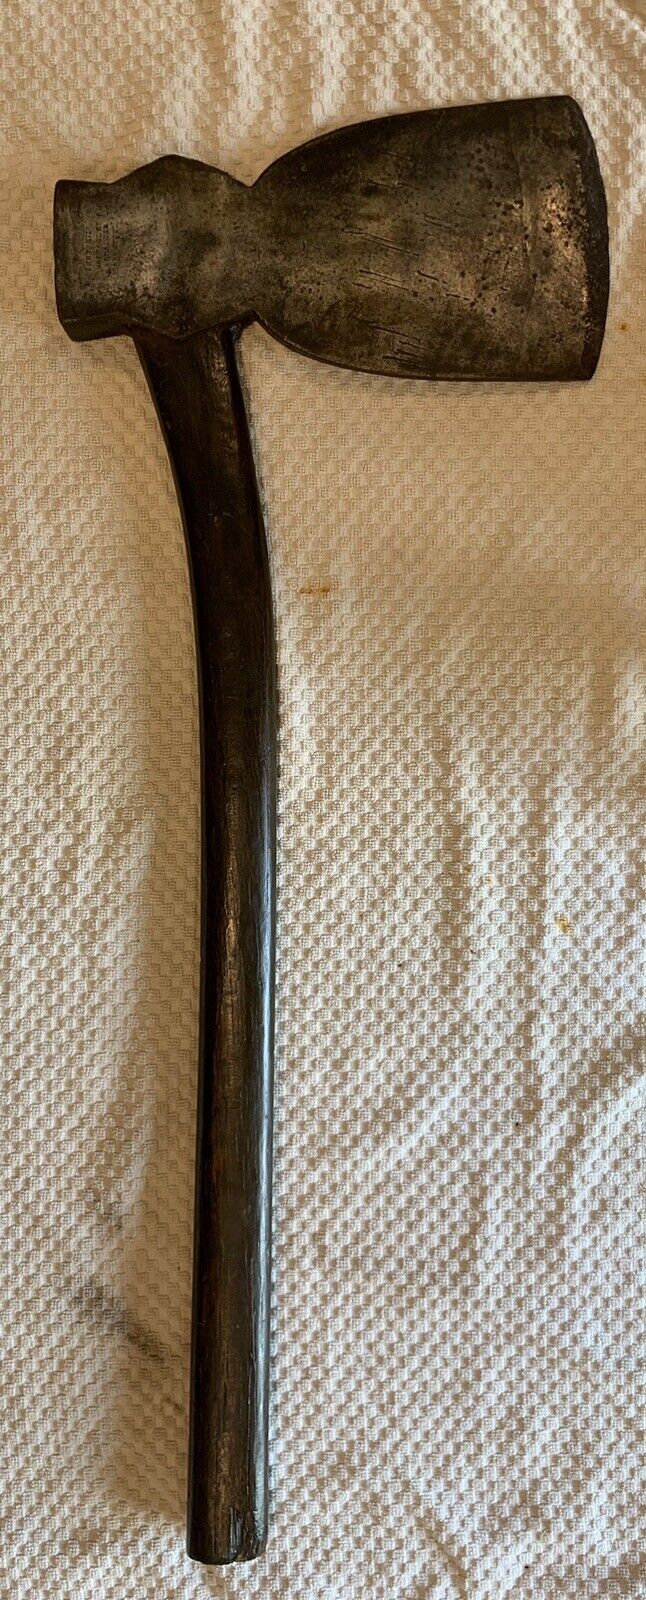 Antique Underhill Edge & Tool Co Shipwright Axe Timber Framing Tool Stamped “63”